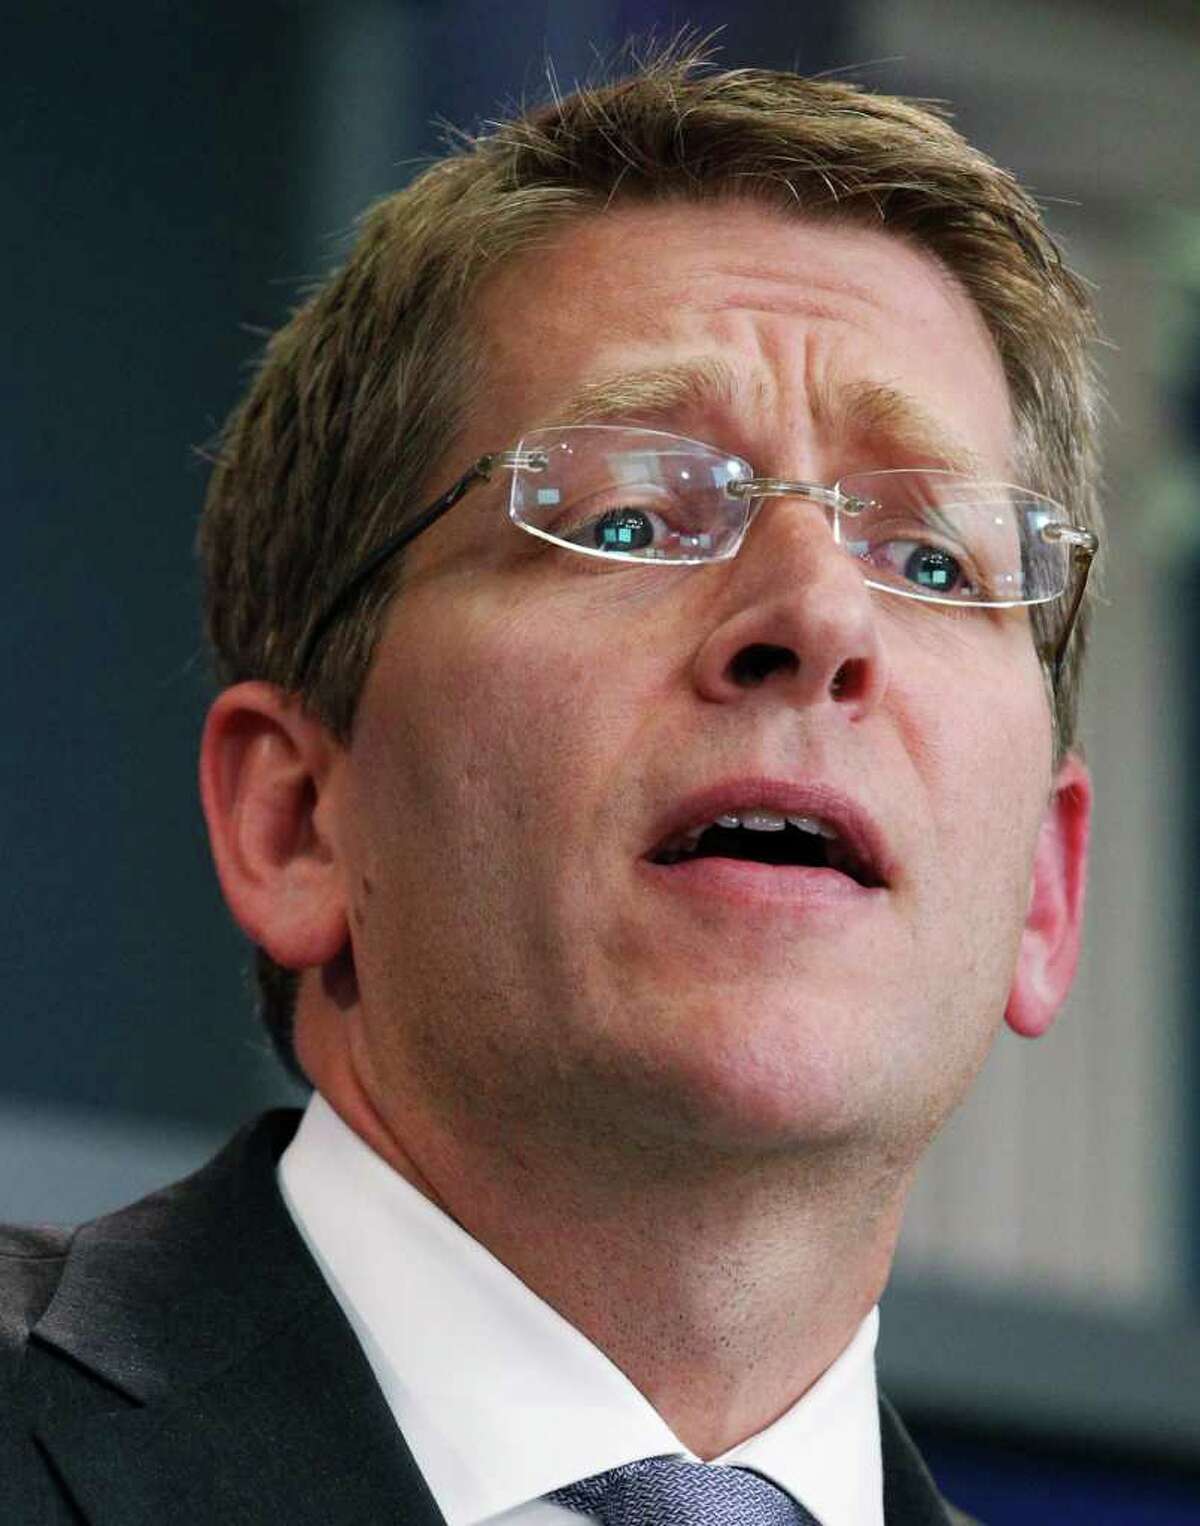 White House Press Secretary Jay Carney speaks to reporters during a press briefing in the Brady Briefing Room of the White House in Washington, Wednesday, July 27, 2011.